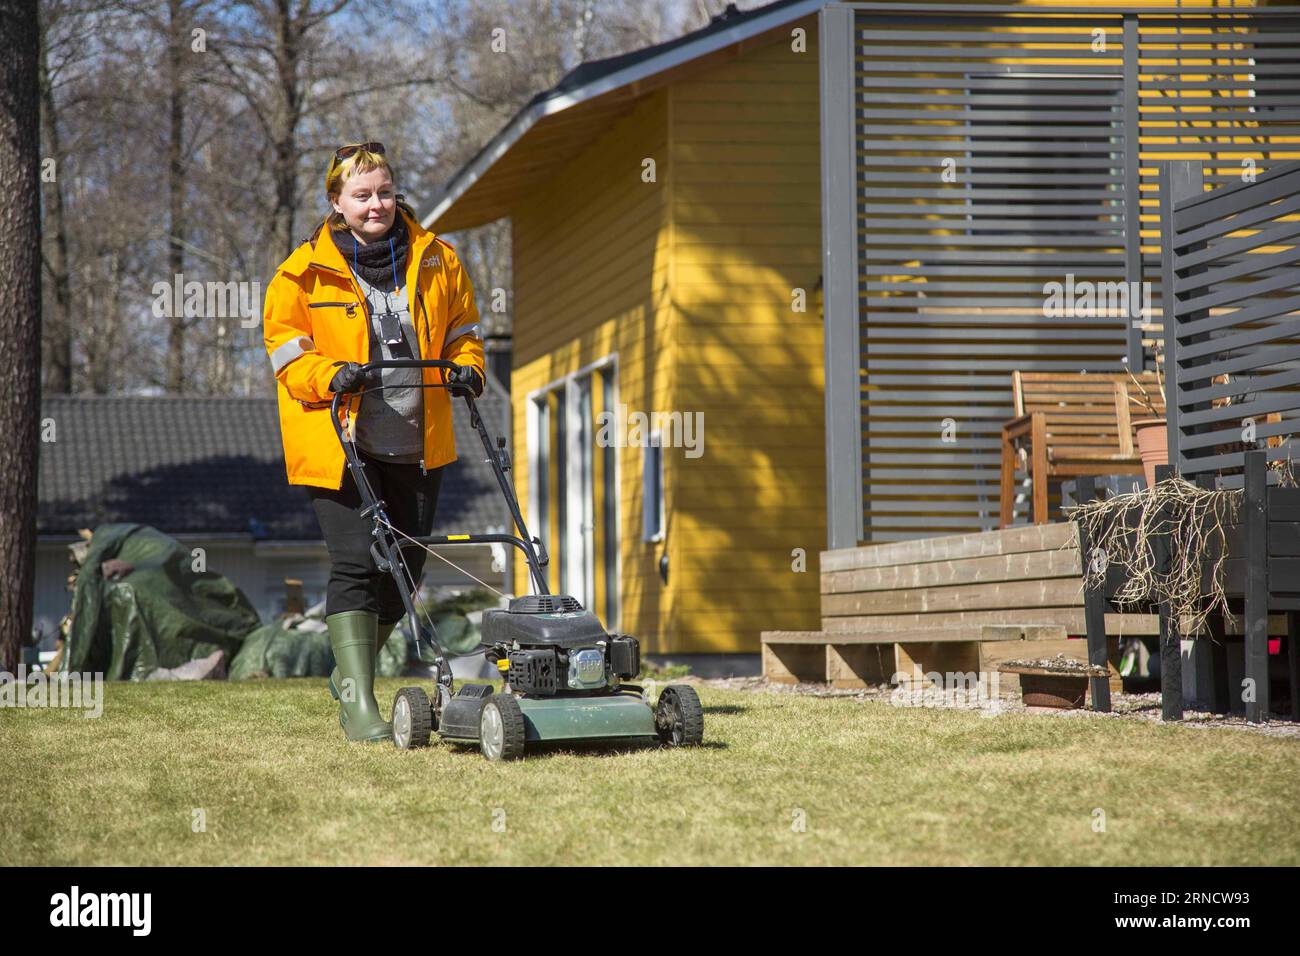 (160422) -- HELSINKI, April 22, 2016 -- Photo provided by the The , Posti on April 21 shows a postwoman mowing lawns at a house in Finland. People who want their lawns mowed during the summer will now be able to ask a postman or postwoman to do it. The , Posti, is launching a service offering lawn mowing as part of its Tuesday deliveries. FINLAND-HELSINKI-POST OFFICE-LAWN MAWING SERVICE Finnishxpostxoffice PUBLICATIONxNOTxINxCHN   160422 Helsinki April 22 2016 Photo provided by The The Posti ON April 21 Shows a Woman post mowing lawns AT a House in Finland Celebrities Who want their lawns mowe Stock Photo